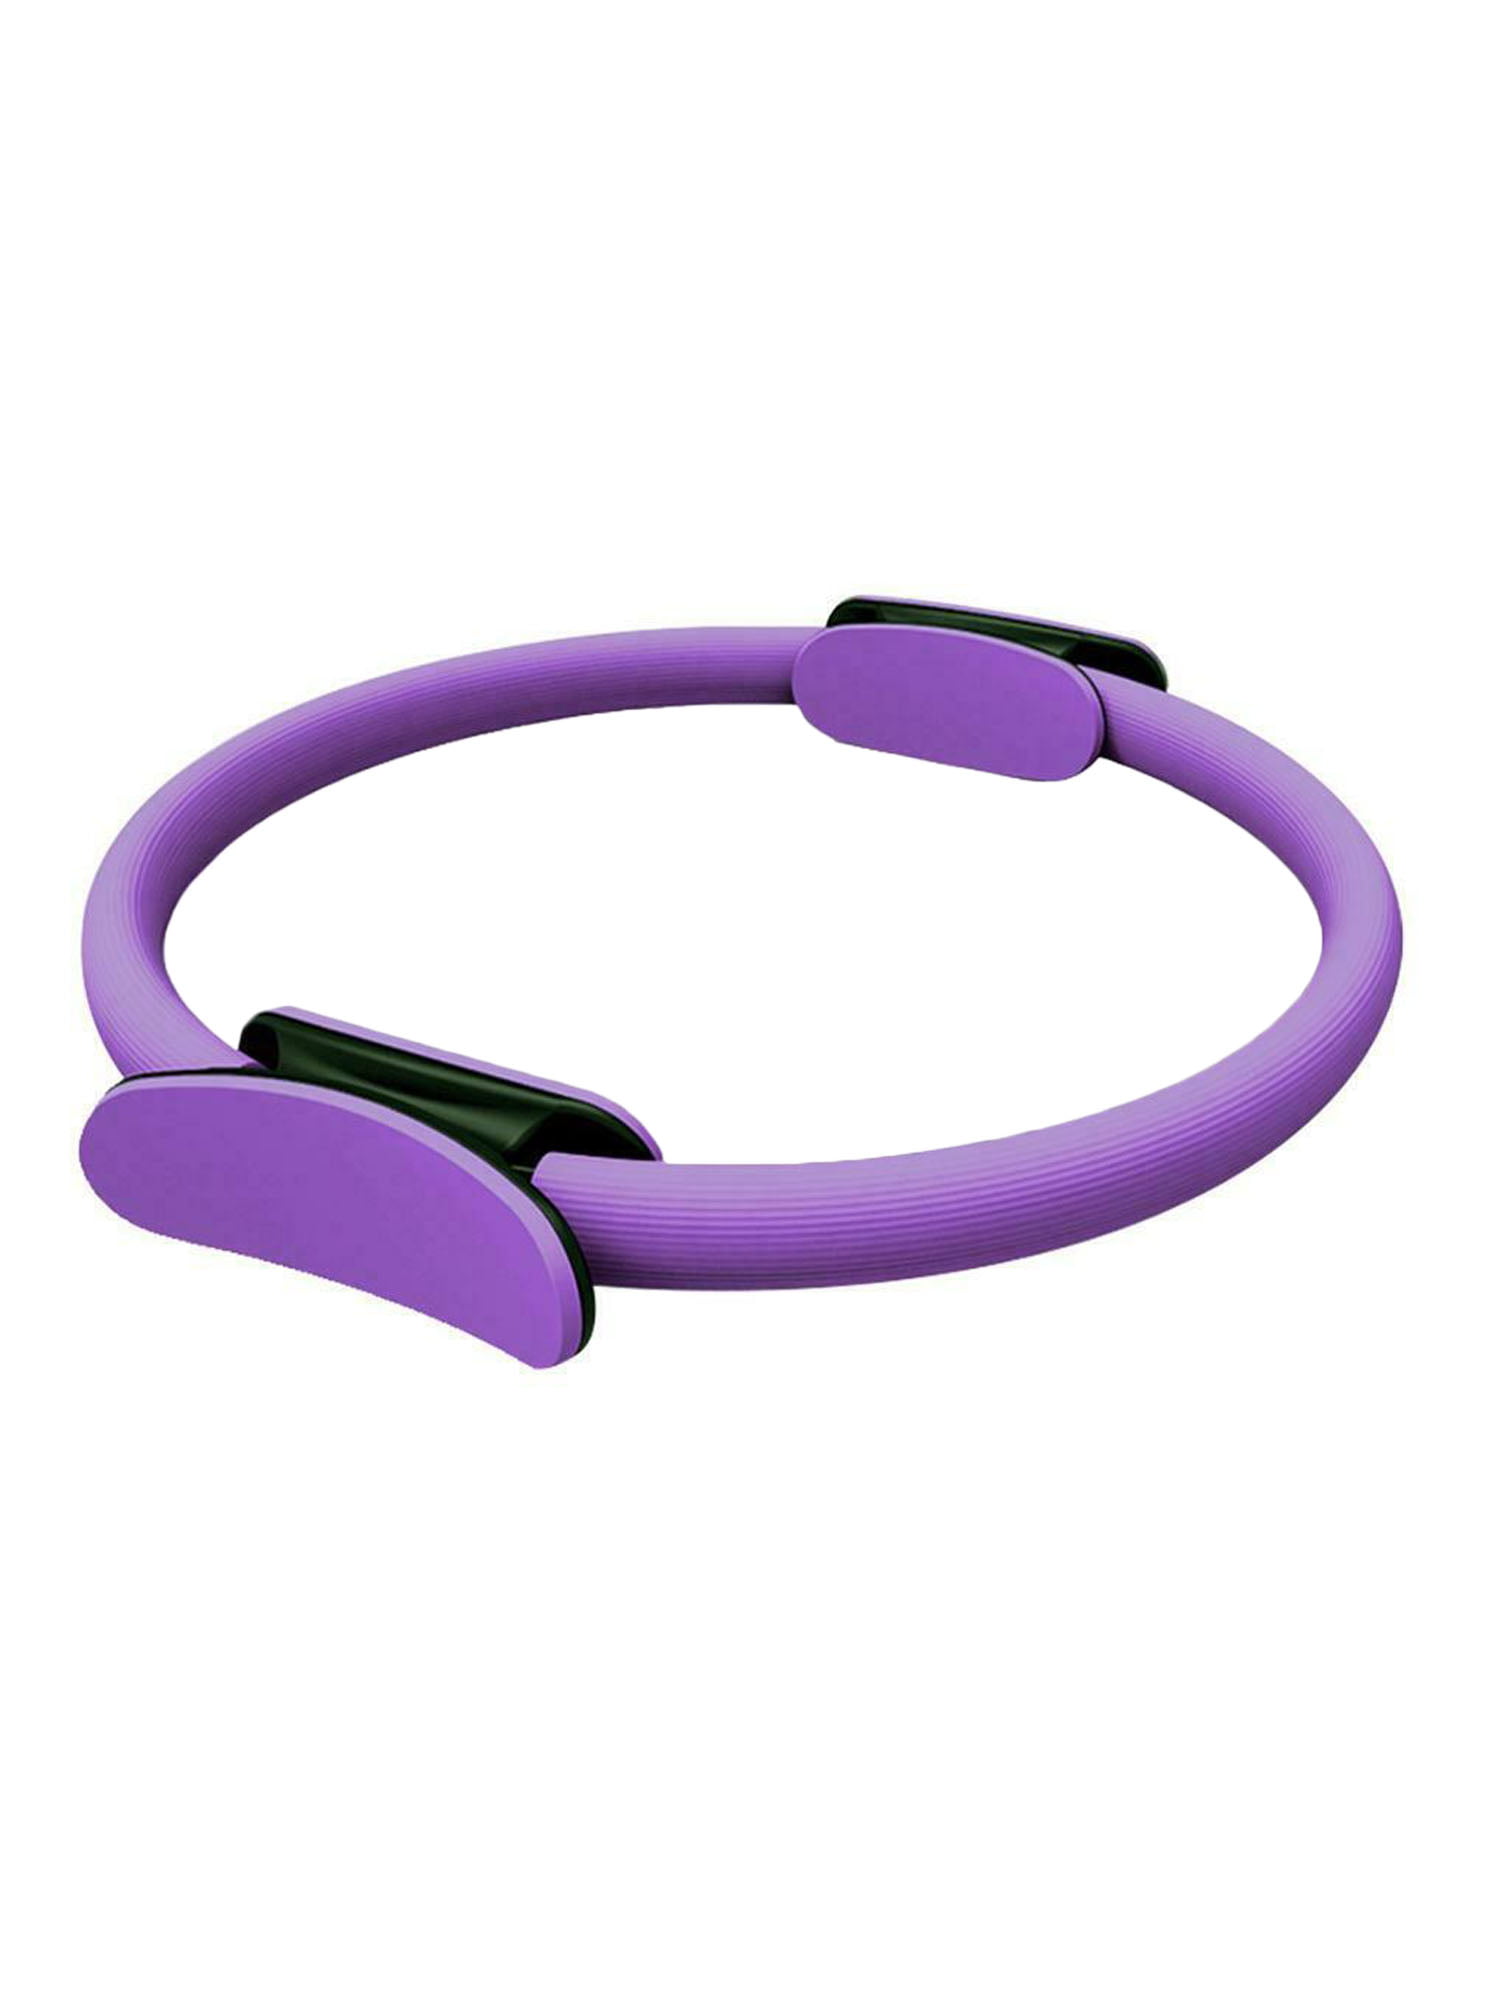 Pilates Ring Yoga Circle Muscle Exercise Fitness Body Trainer Magic Tool US 